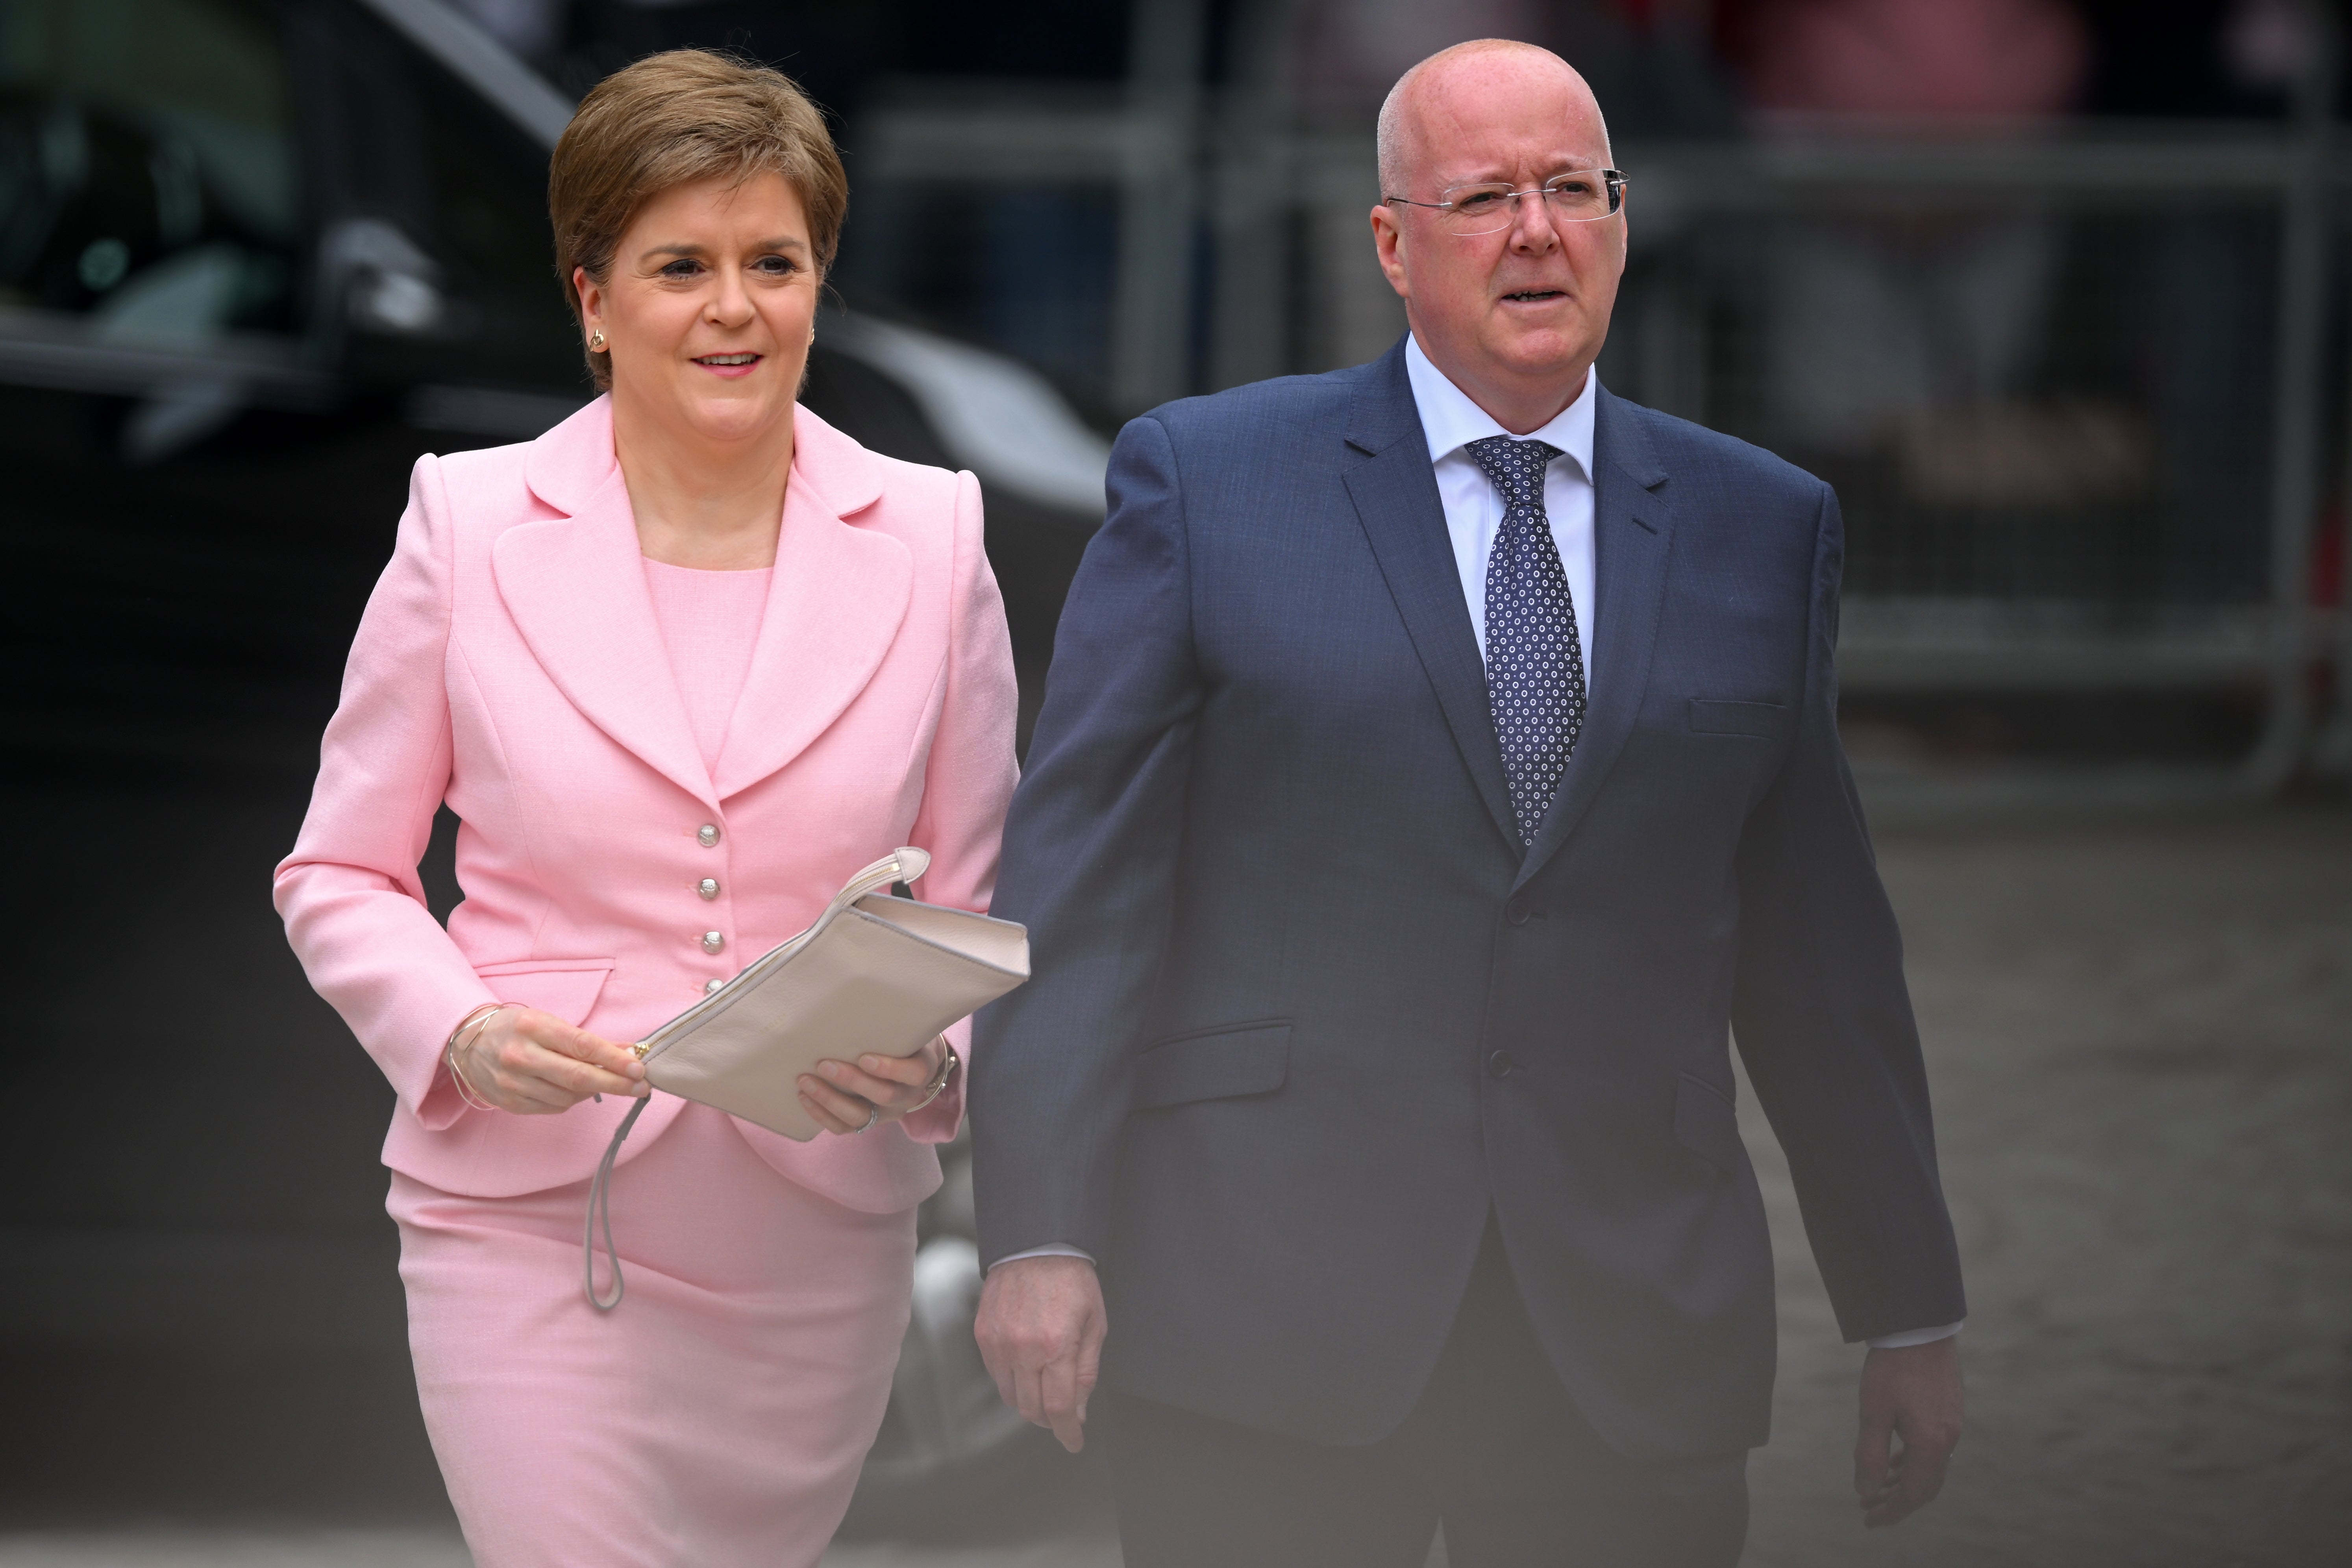 Ms Sturgeon is married to Peter Murrell